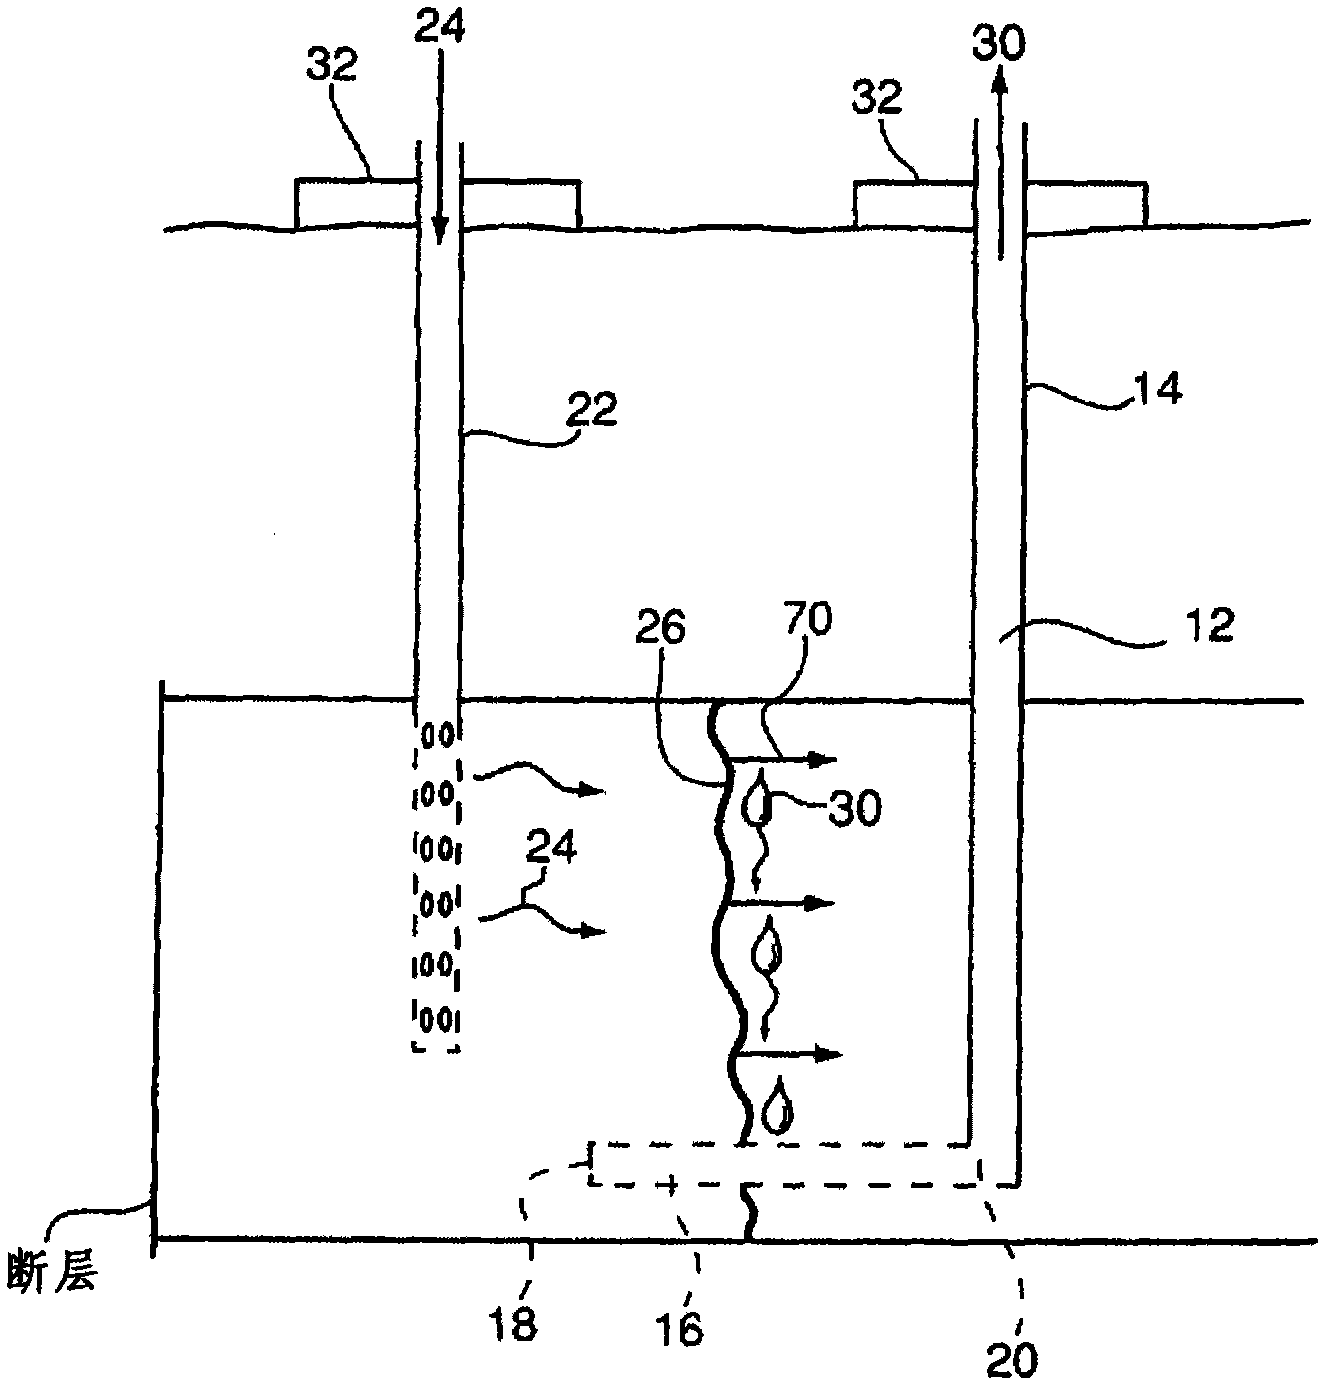 A modified process for hydrocarbon recovery using in situ combustion